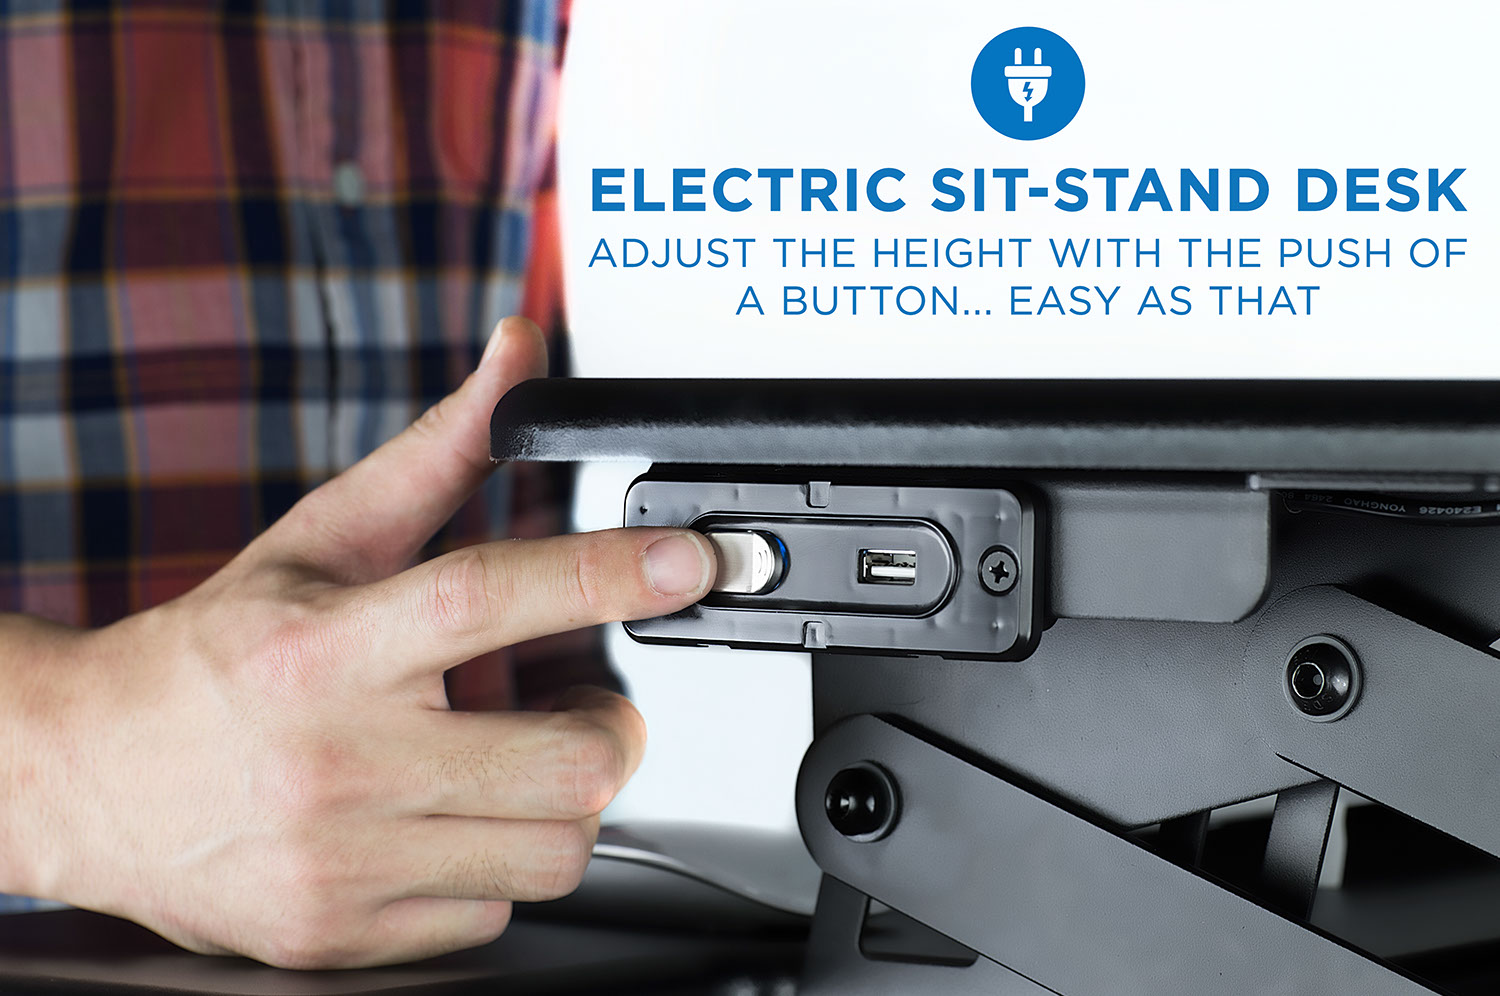 Mount-It! Electric Standing Desk Converter | Motorized Sit Stand Desk With Built In USB Port | Black - image 5 of 9